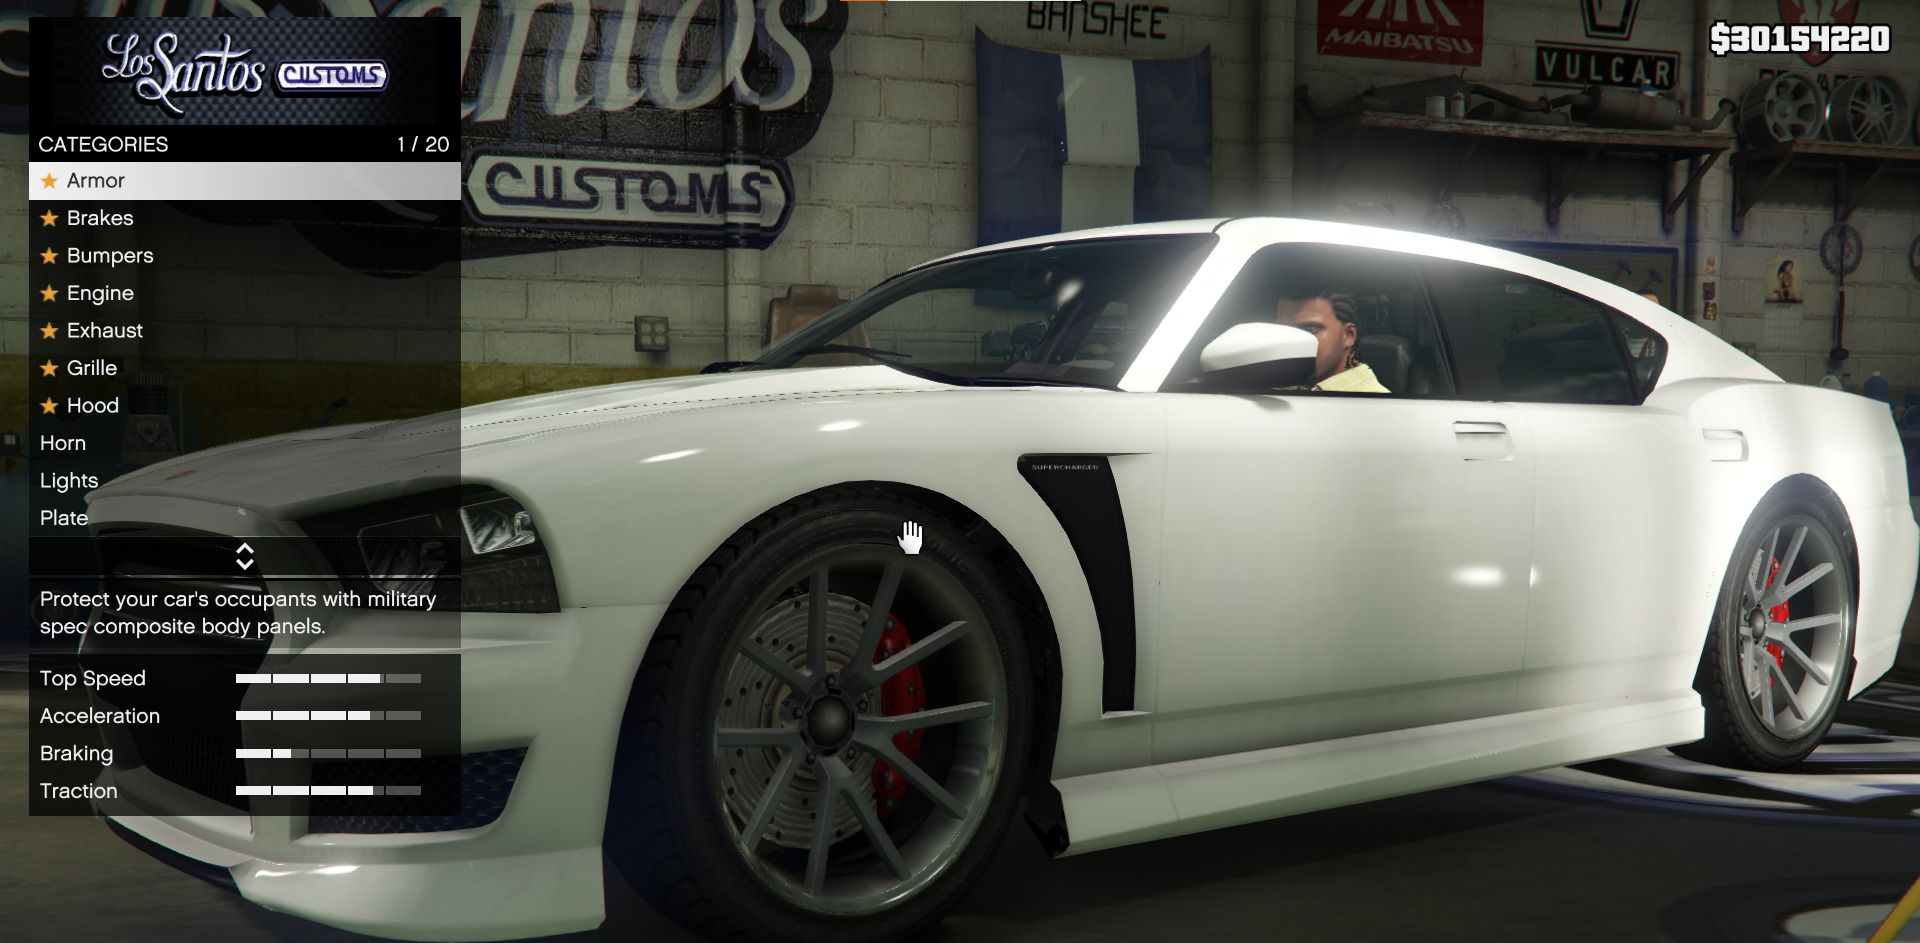 Head to Los Santos Customs in GTA V and look for the Turbo option.